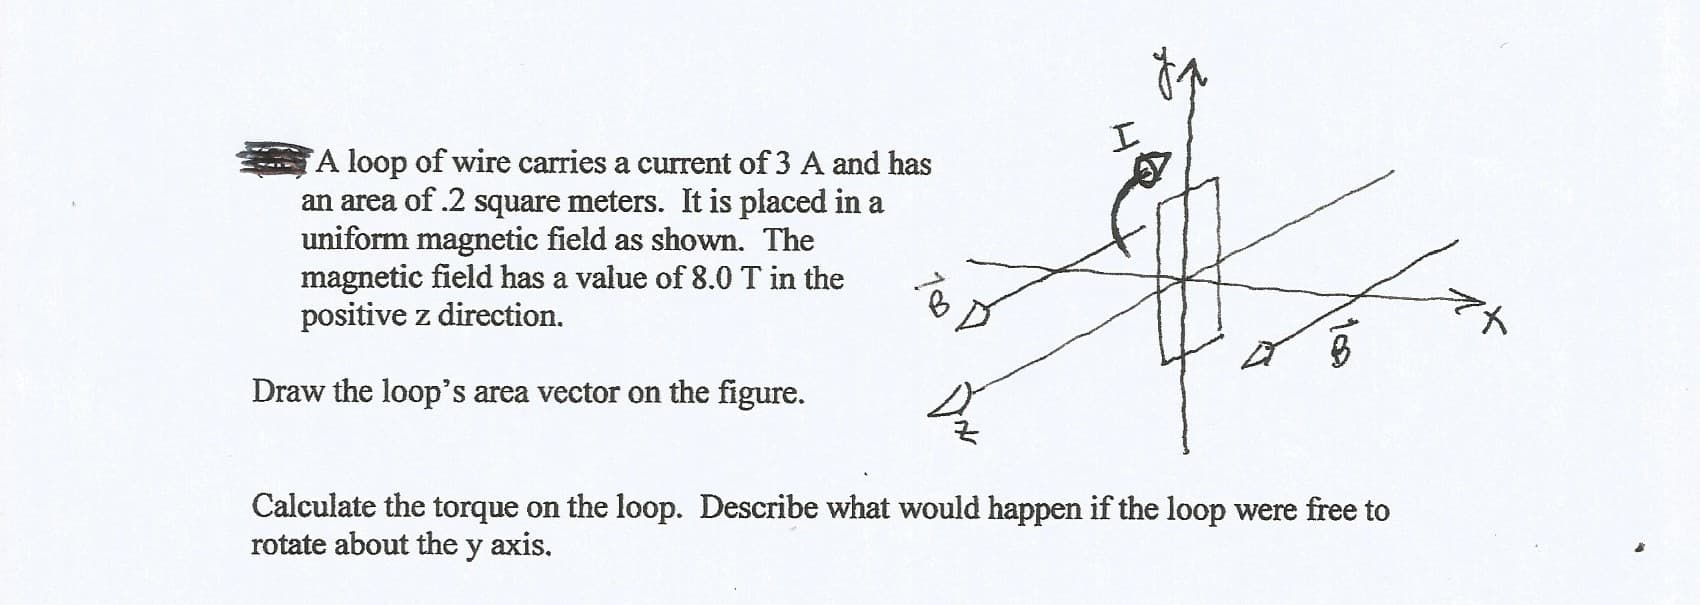 A loop of wire carries a current of 3 A and has
an area of .2 square meters. It is placed in a
uniform magnetic field as shown. The
magnetic field has a value of 8.0 T in the
positive z direction.
Draw the loop's area vector on the figure.
Calculate the torque on the loop. Describe what would happen if the loop were free to
rotate about the y axis.
